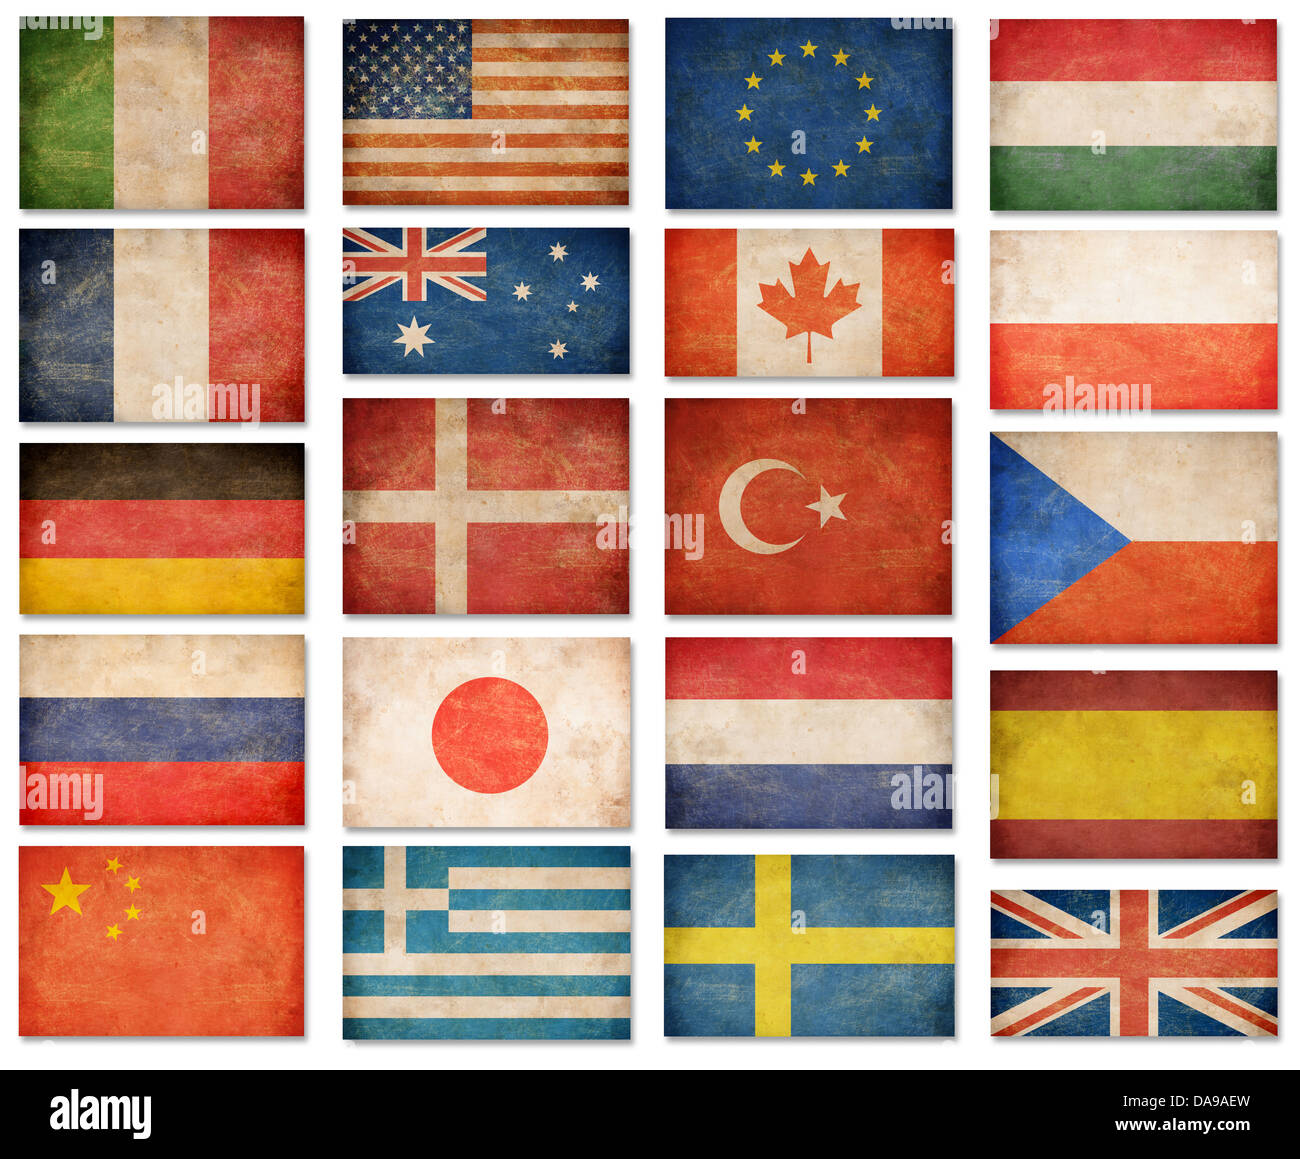 Grunge flags: USA, Great Britain, Italy, France, Denmark, Germany, Russia, Japan, Canada, Spain, Turkey, Australia and others Stock Photo